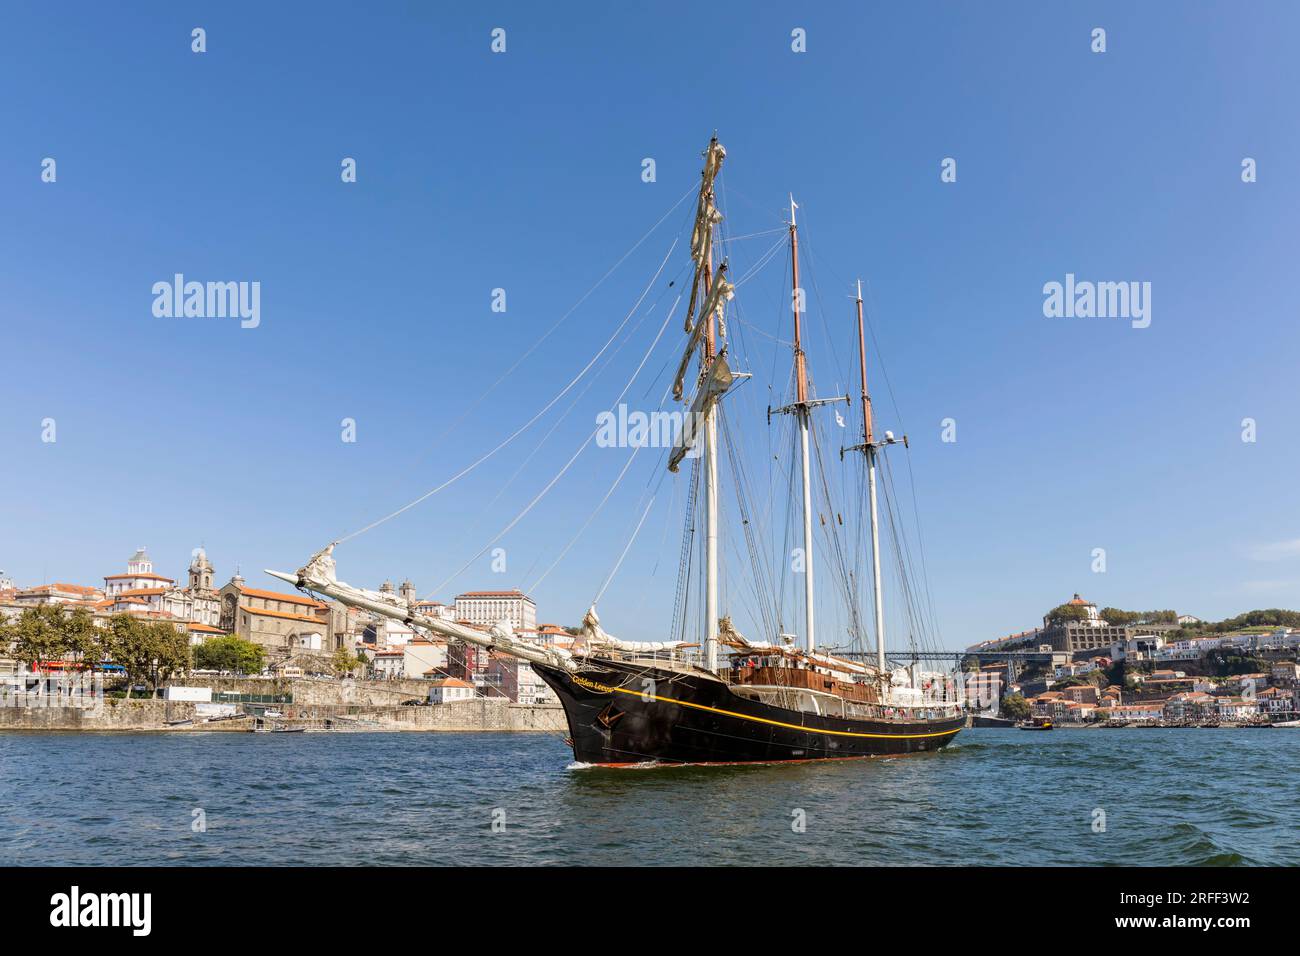 The Gulden Leeuw, or Golden Lion, on the Douro River with the Portuguese city of Porto in the background.   The three-masted topsail schooner was buil Stock Photo